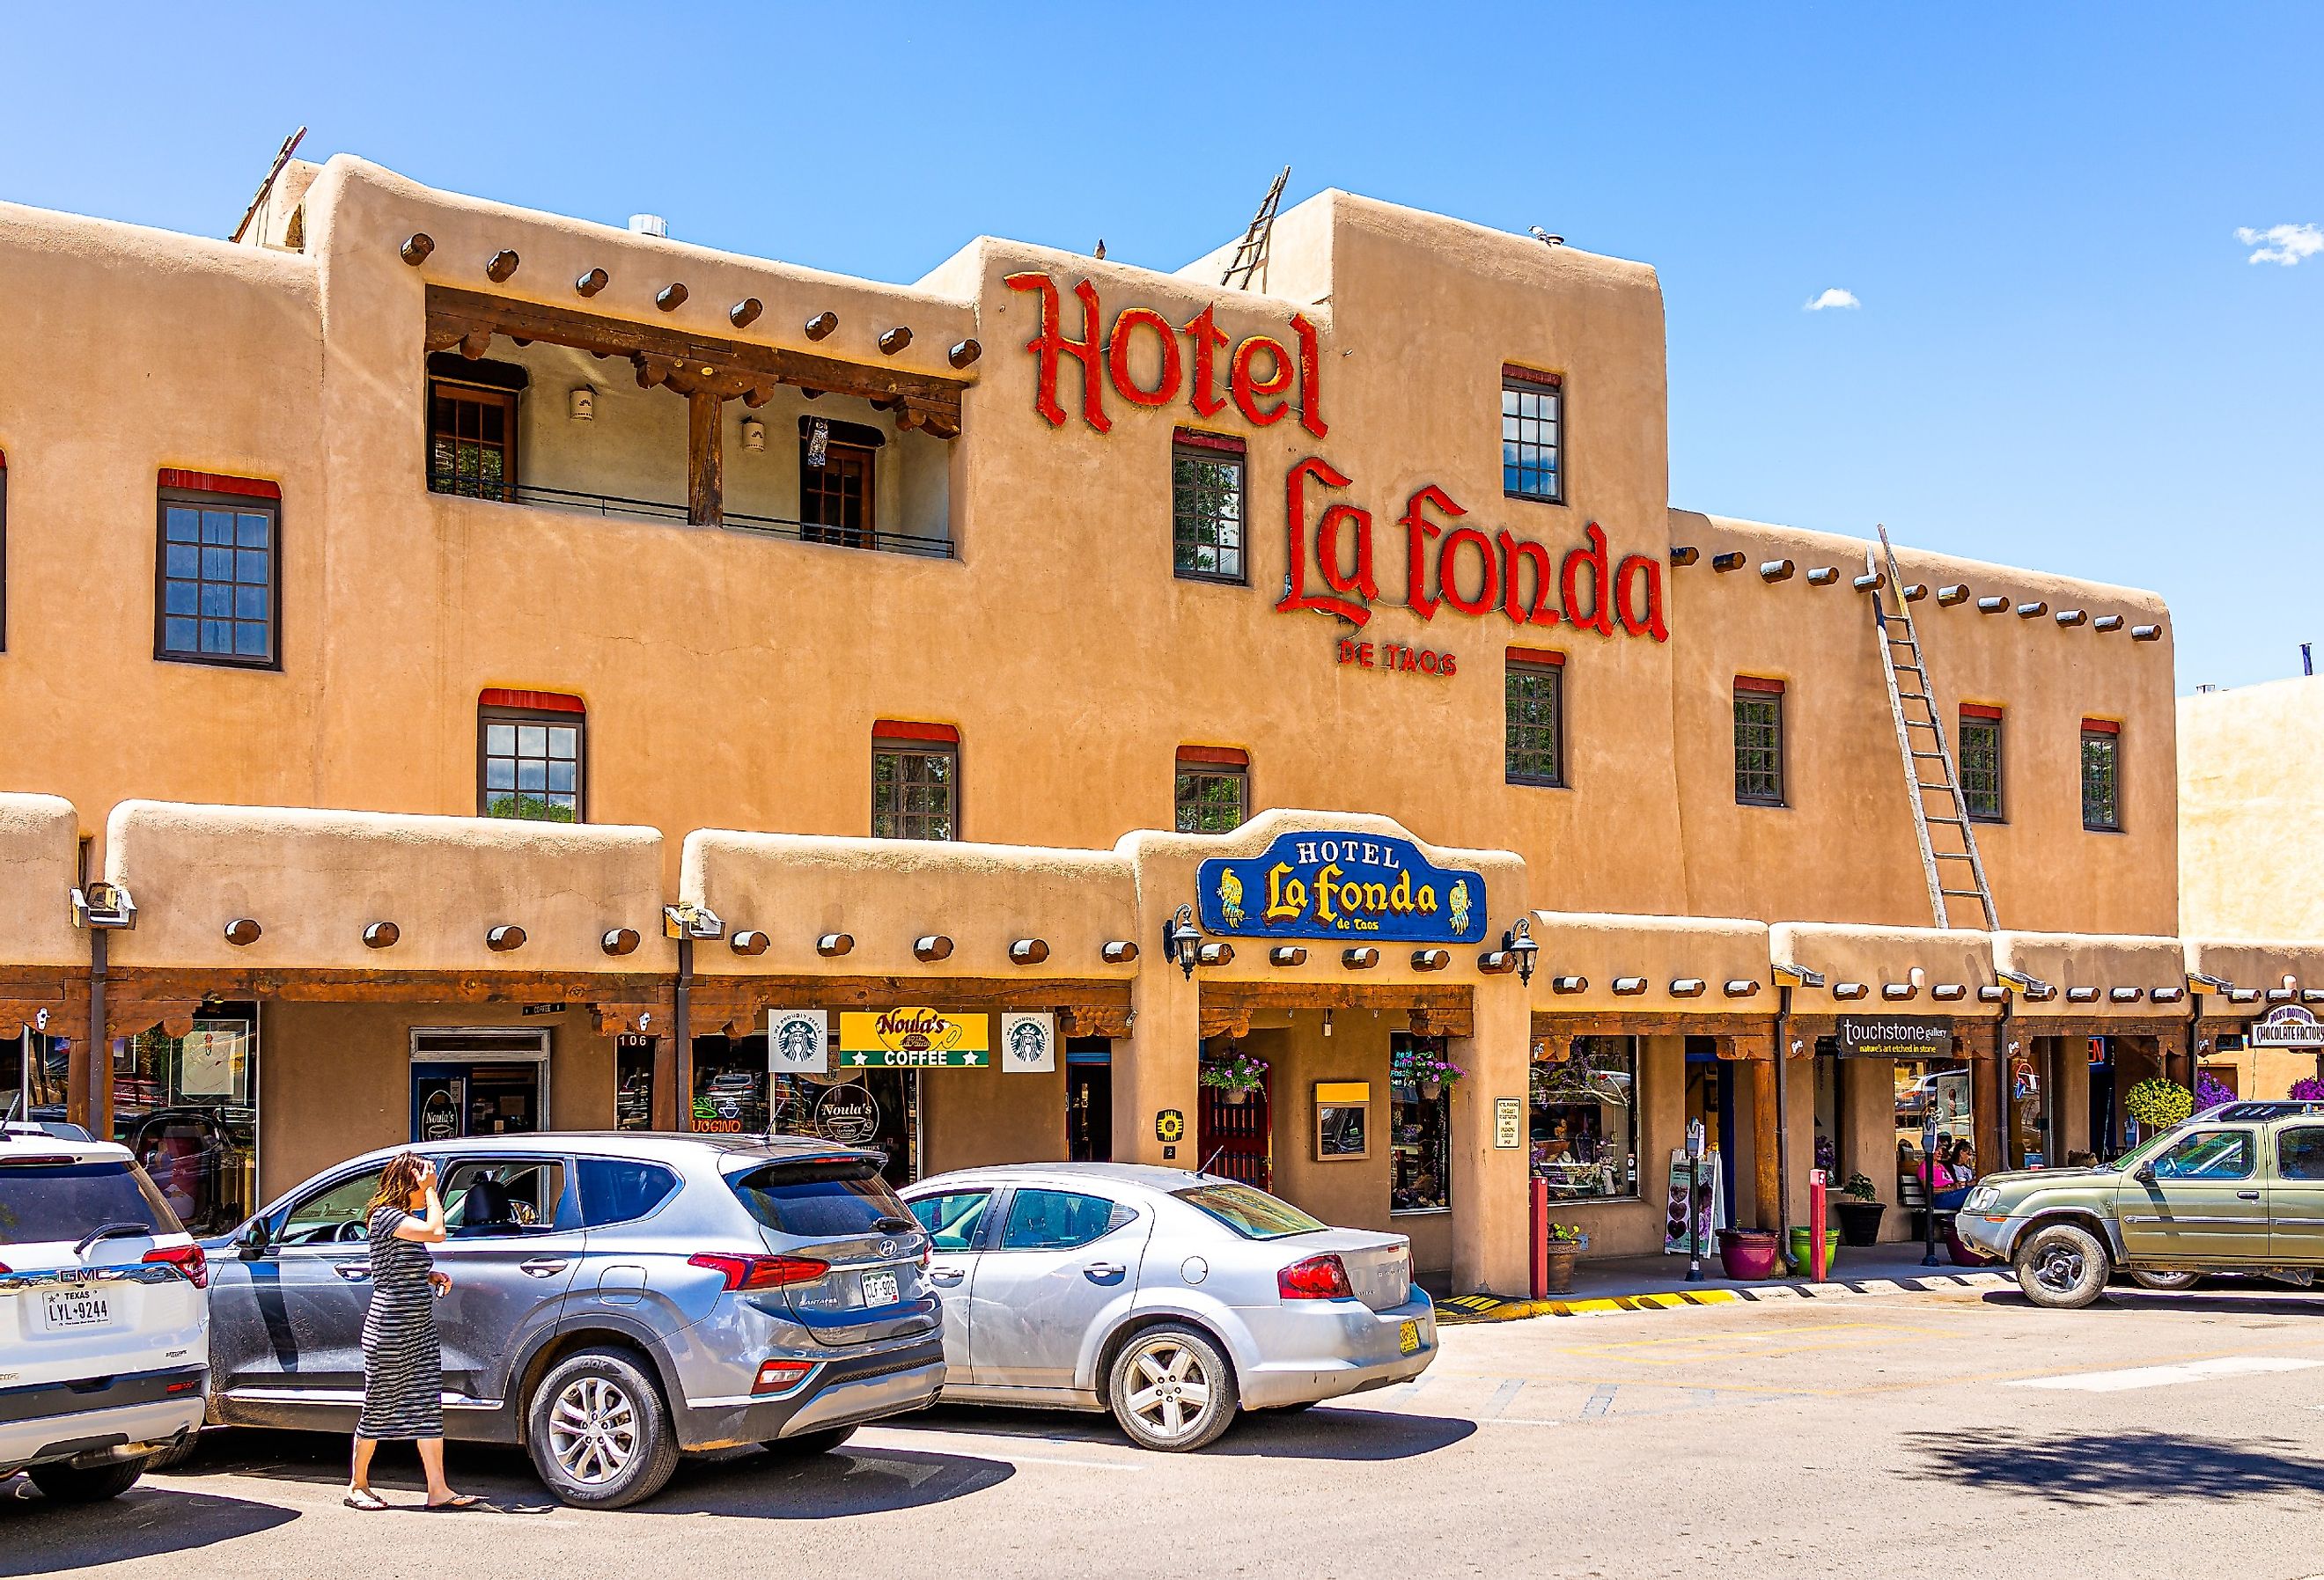 Downtown McCarthy's plaza square in famous town city village old town with sign exterior for Hotel La Fonda, Taos, New Mexico. Image credit Andriy Blokhin via Shutterstock